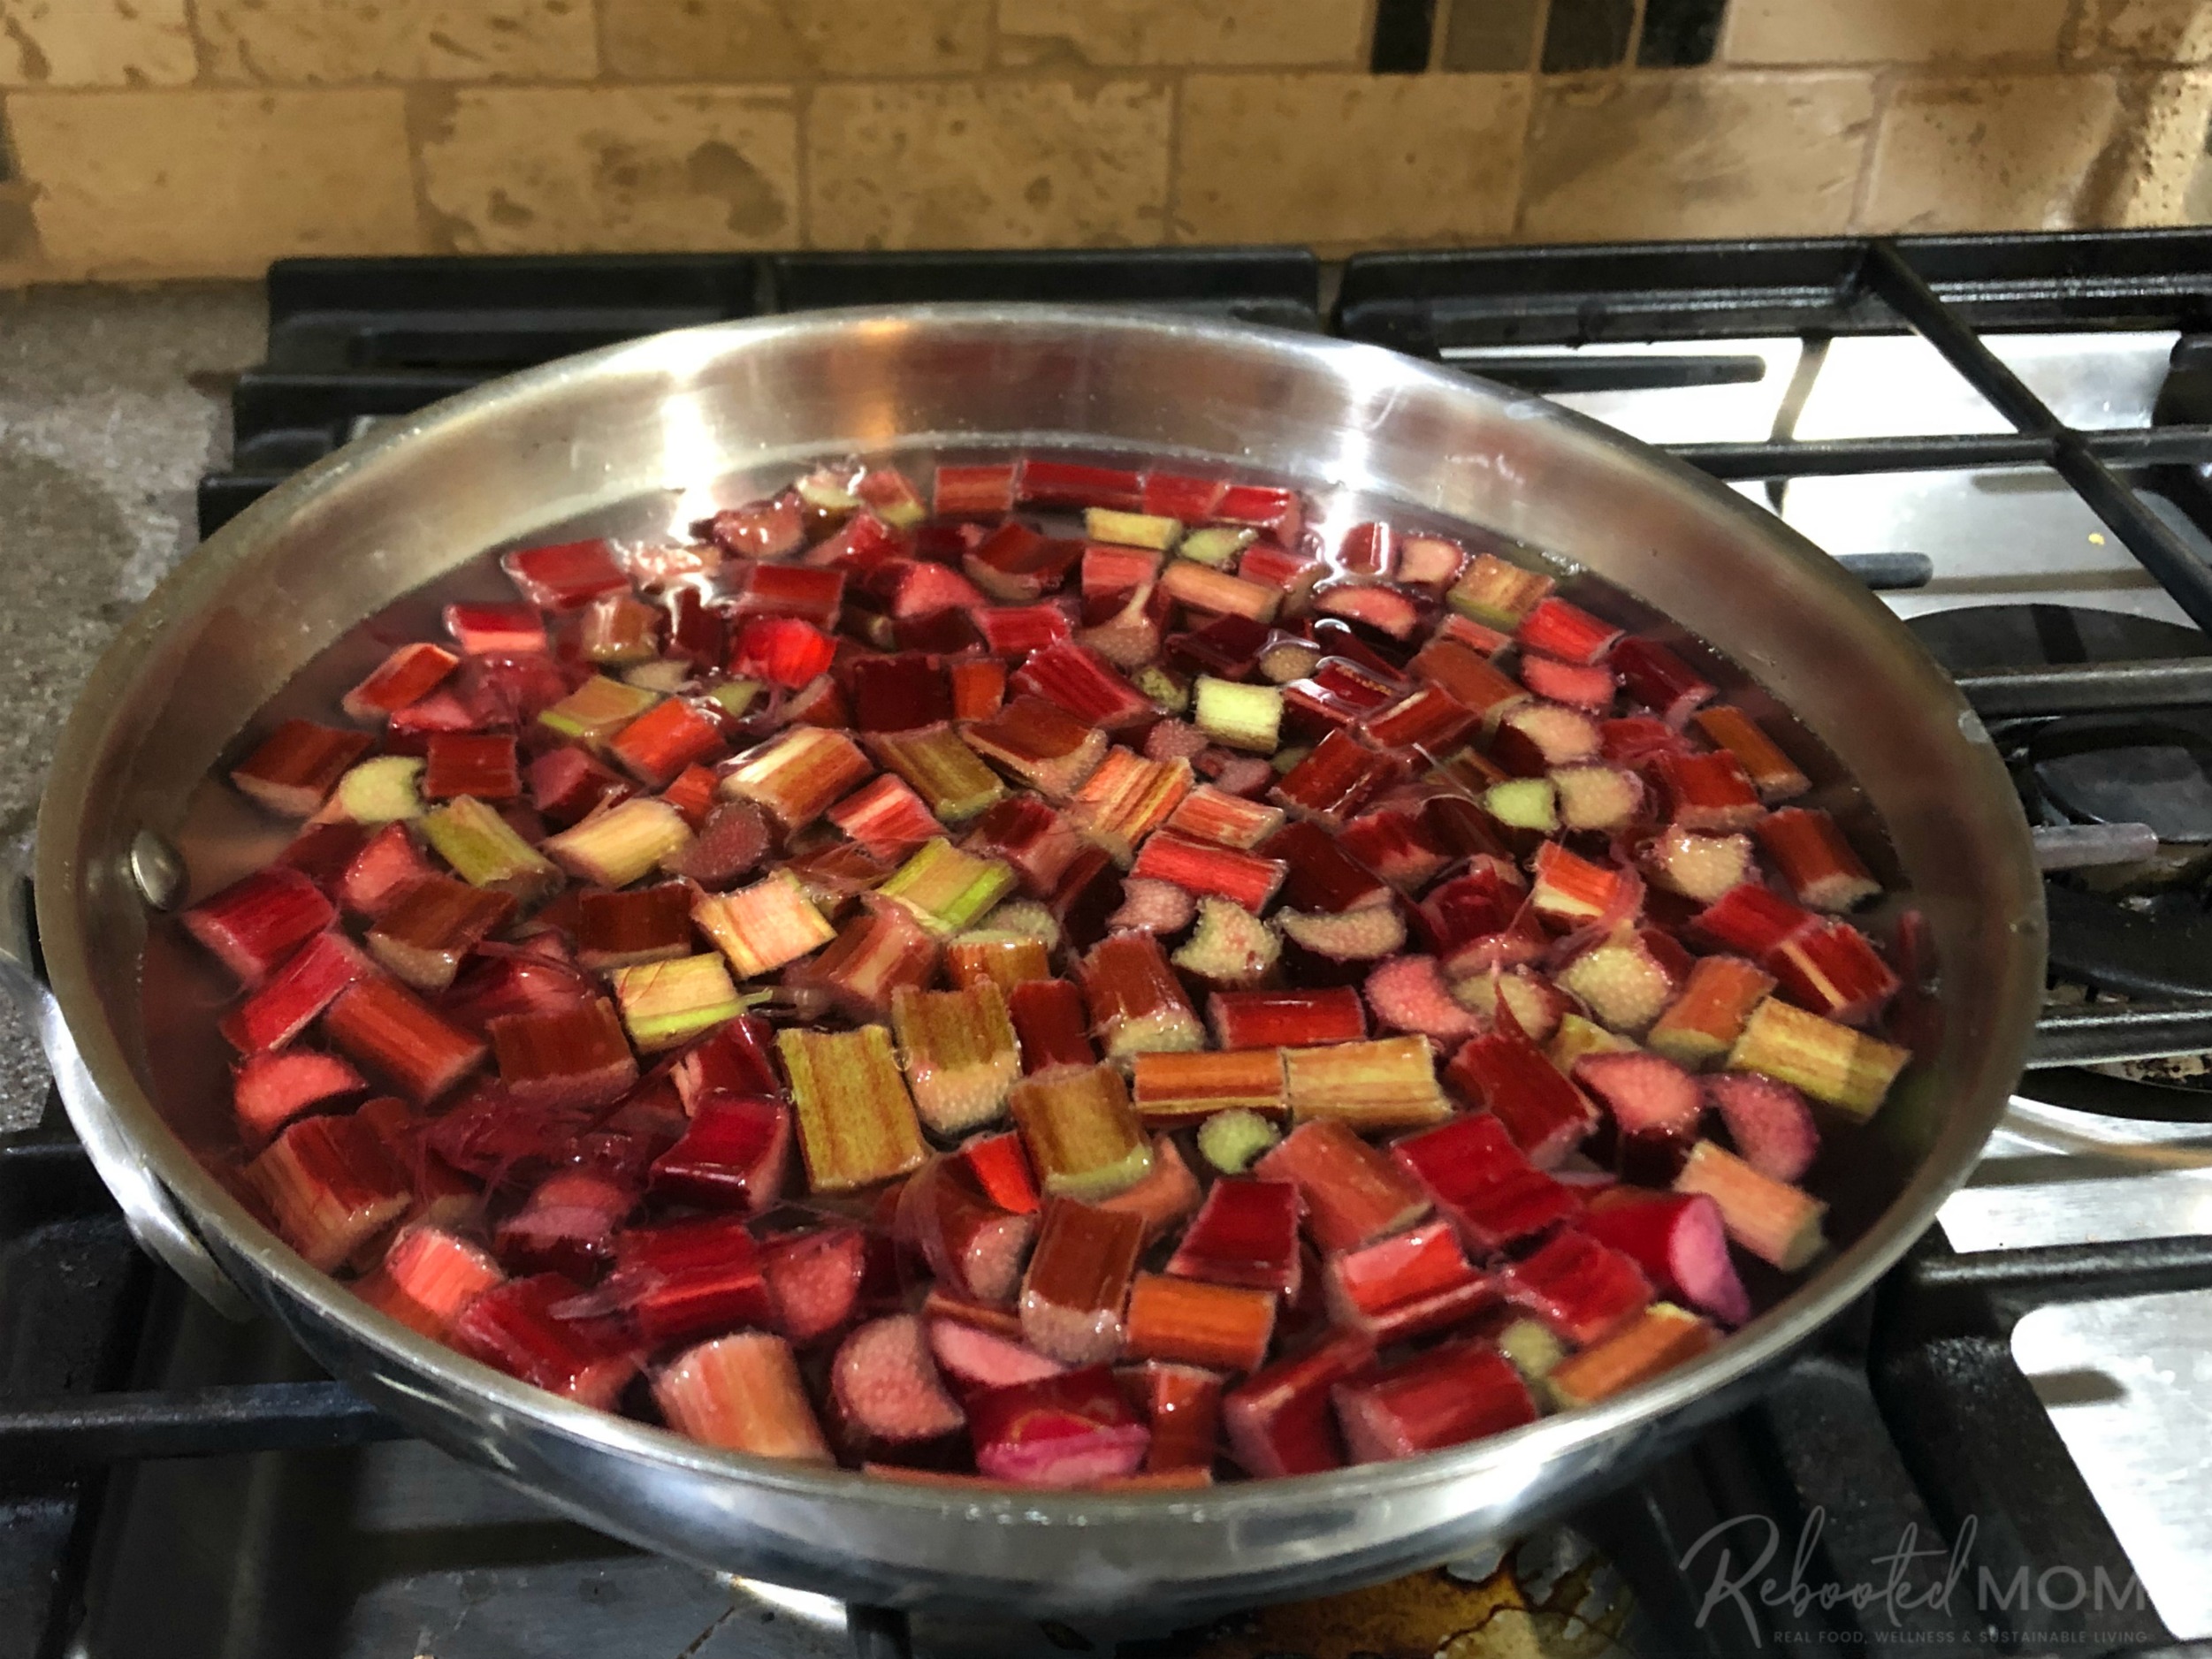 Rhubarb simmering on the stove